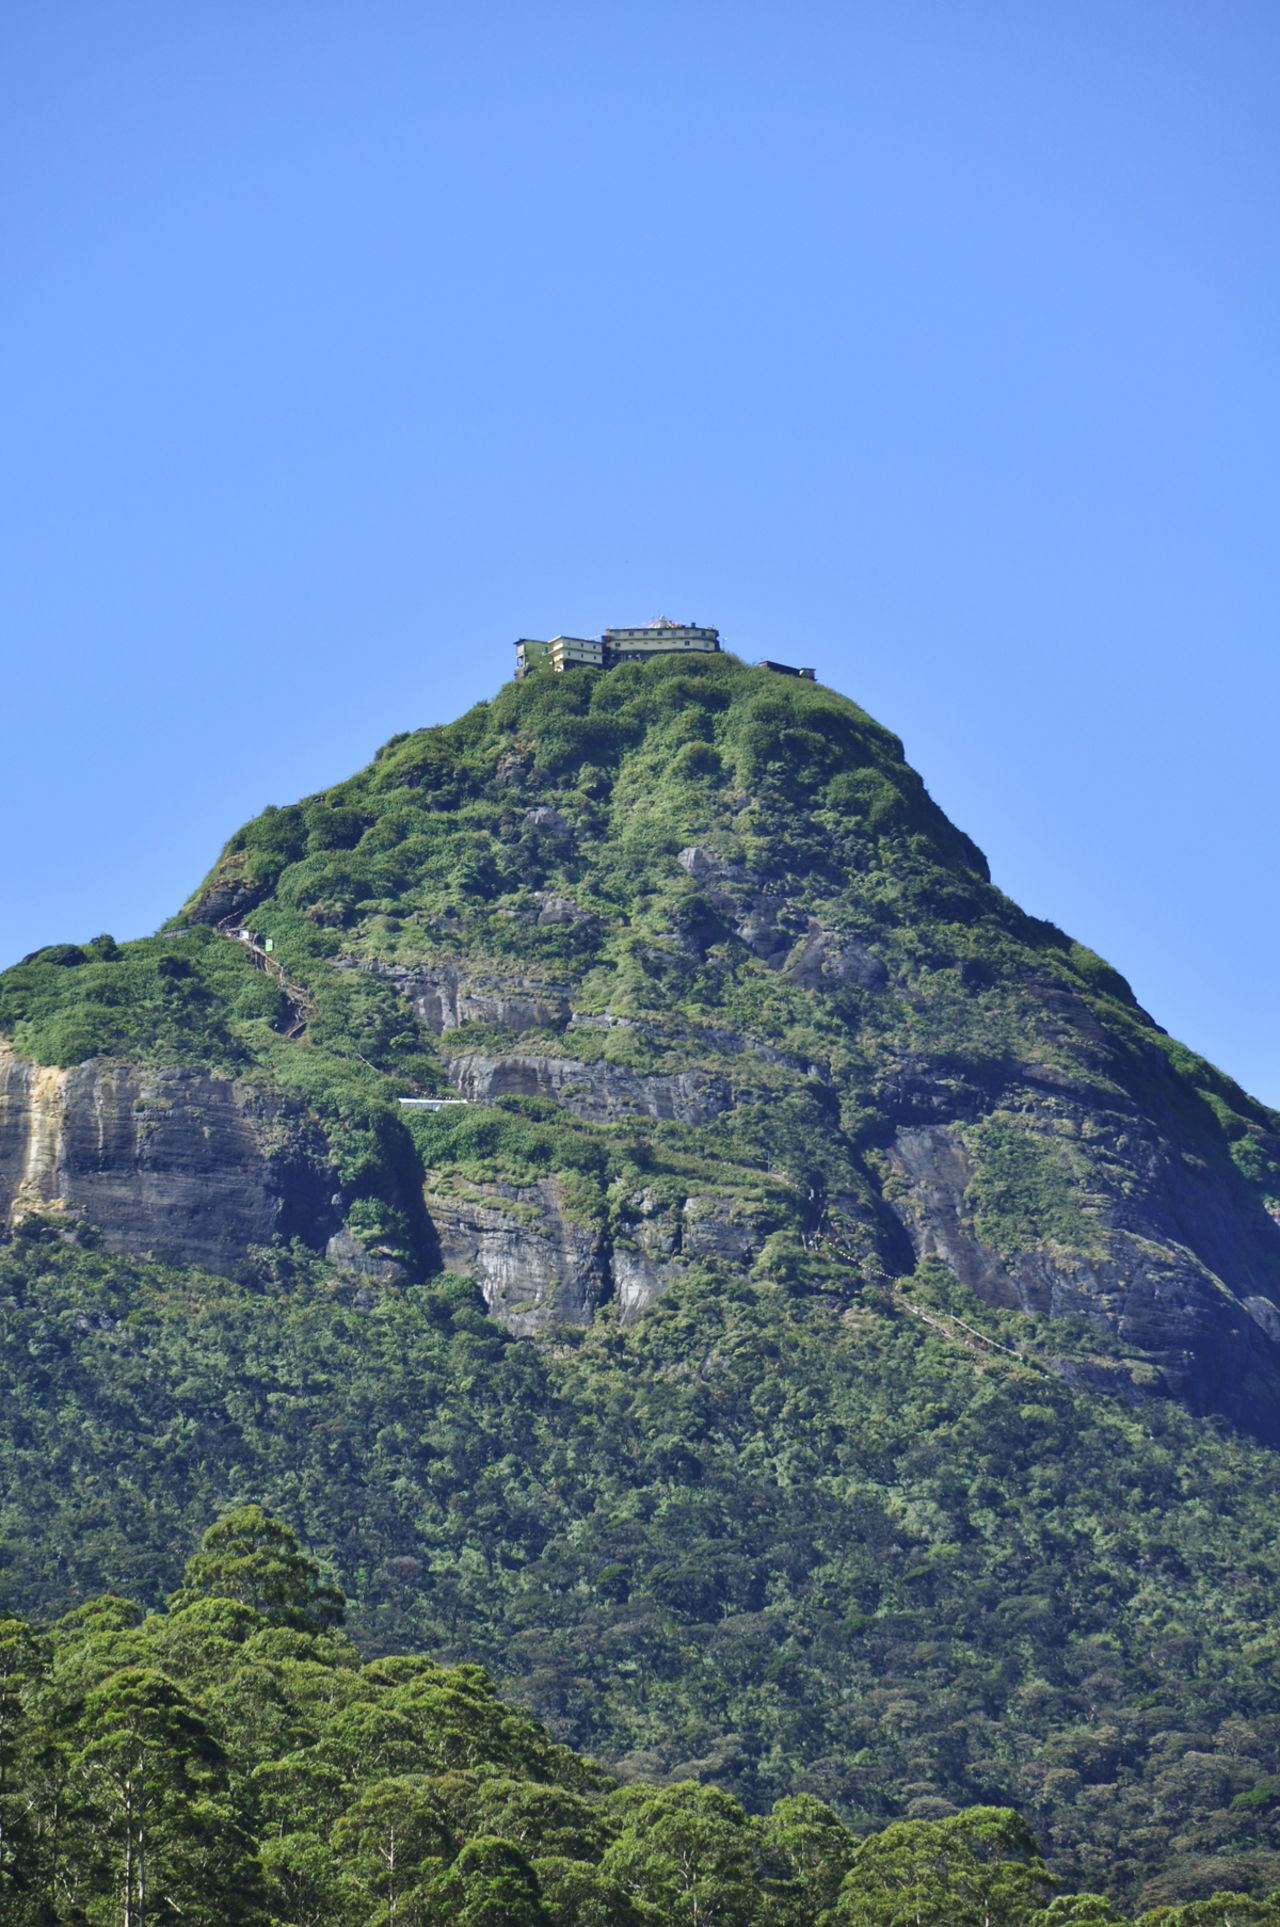 The 2,243-meter peak is one of Sri Lanka's highest mountains. It lies among the southern Central Highlands of the Ratnapura district, 150 kilometers east of Sri Lanka's capital, Colombo. 